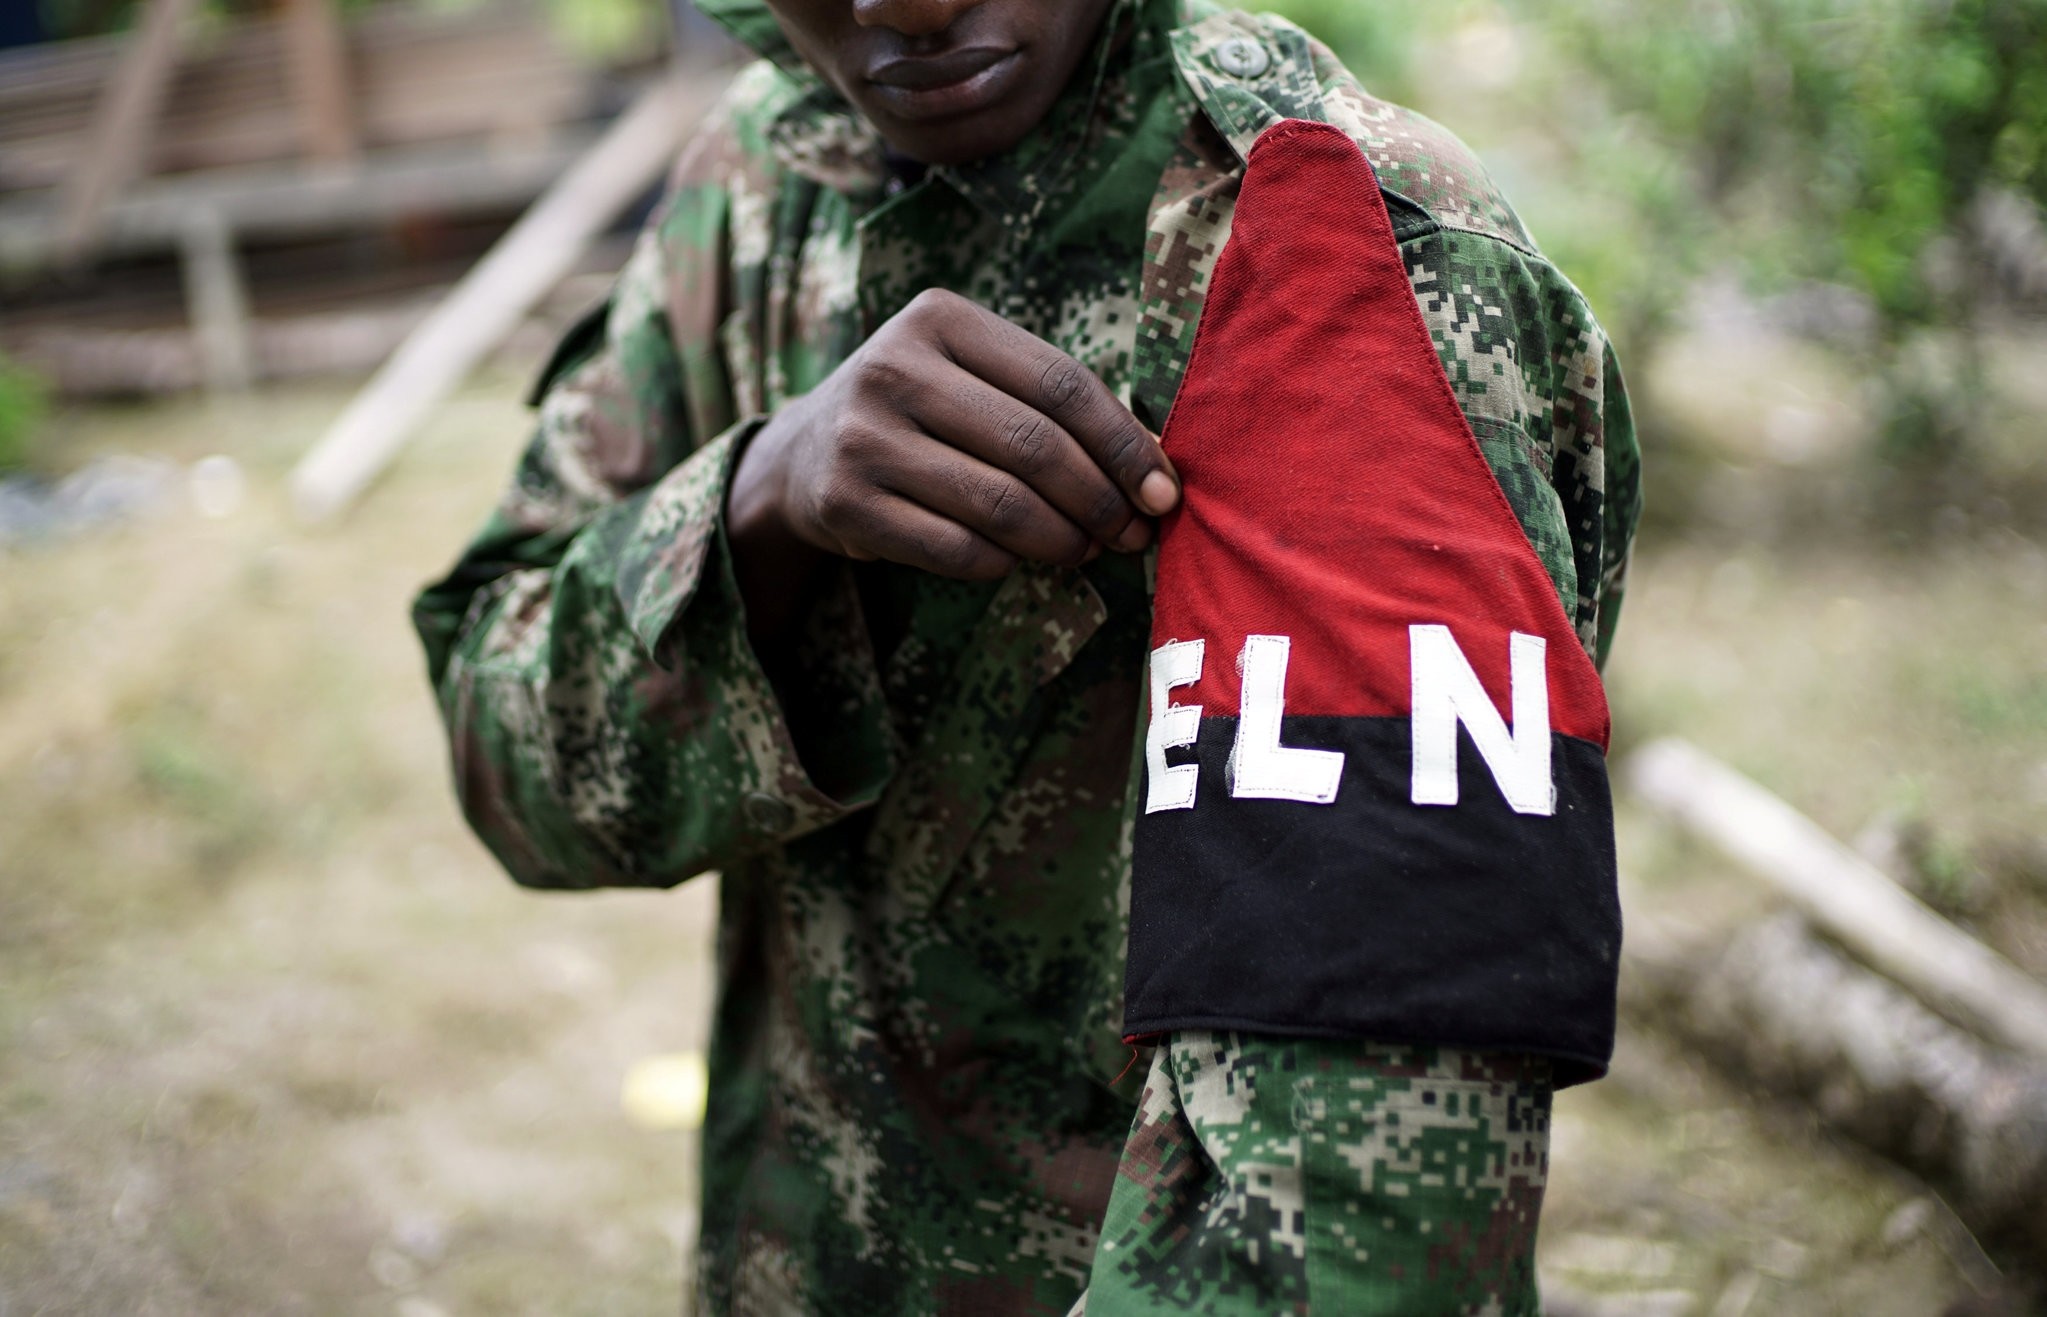 A rebel of Colombia's Marxist National Liberation Army (ELN) shows his armband while posing for a photograph, in the northwestern jungles, Colombia August 31, 2017. Picture taken August 31, 2017. (REUTERS Photo)